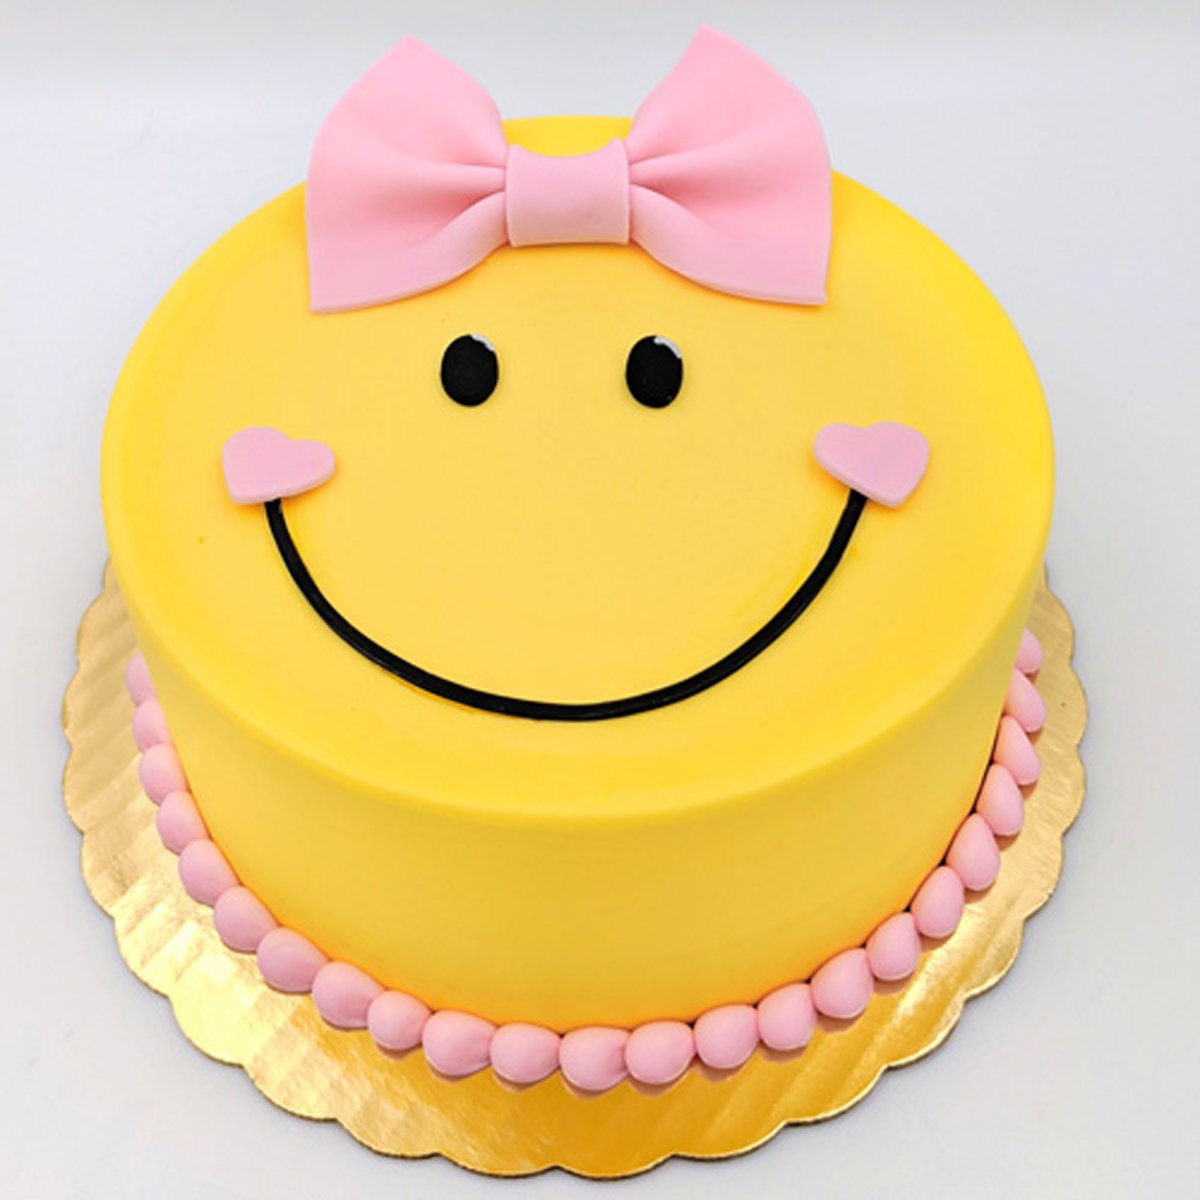 Fun Cake Ideas: Happy Face Cake // Lunch Lady Magazine - Hello Lunch Lady